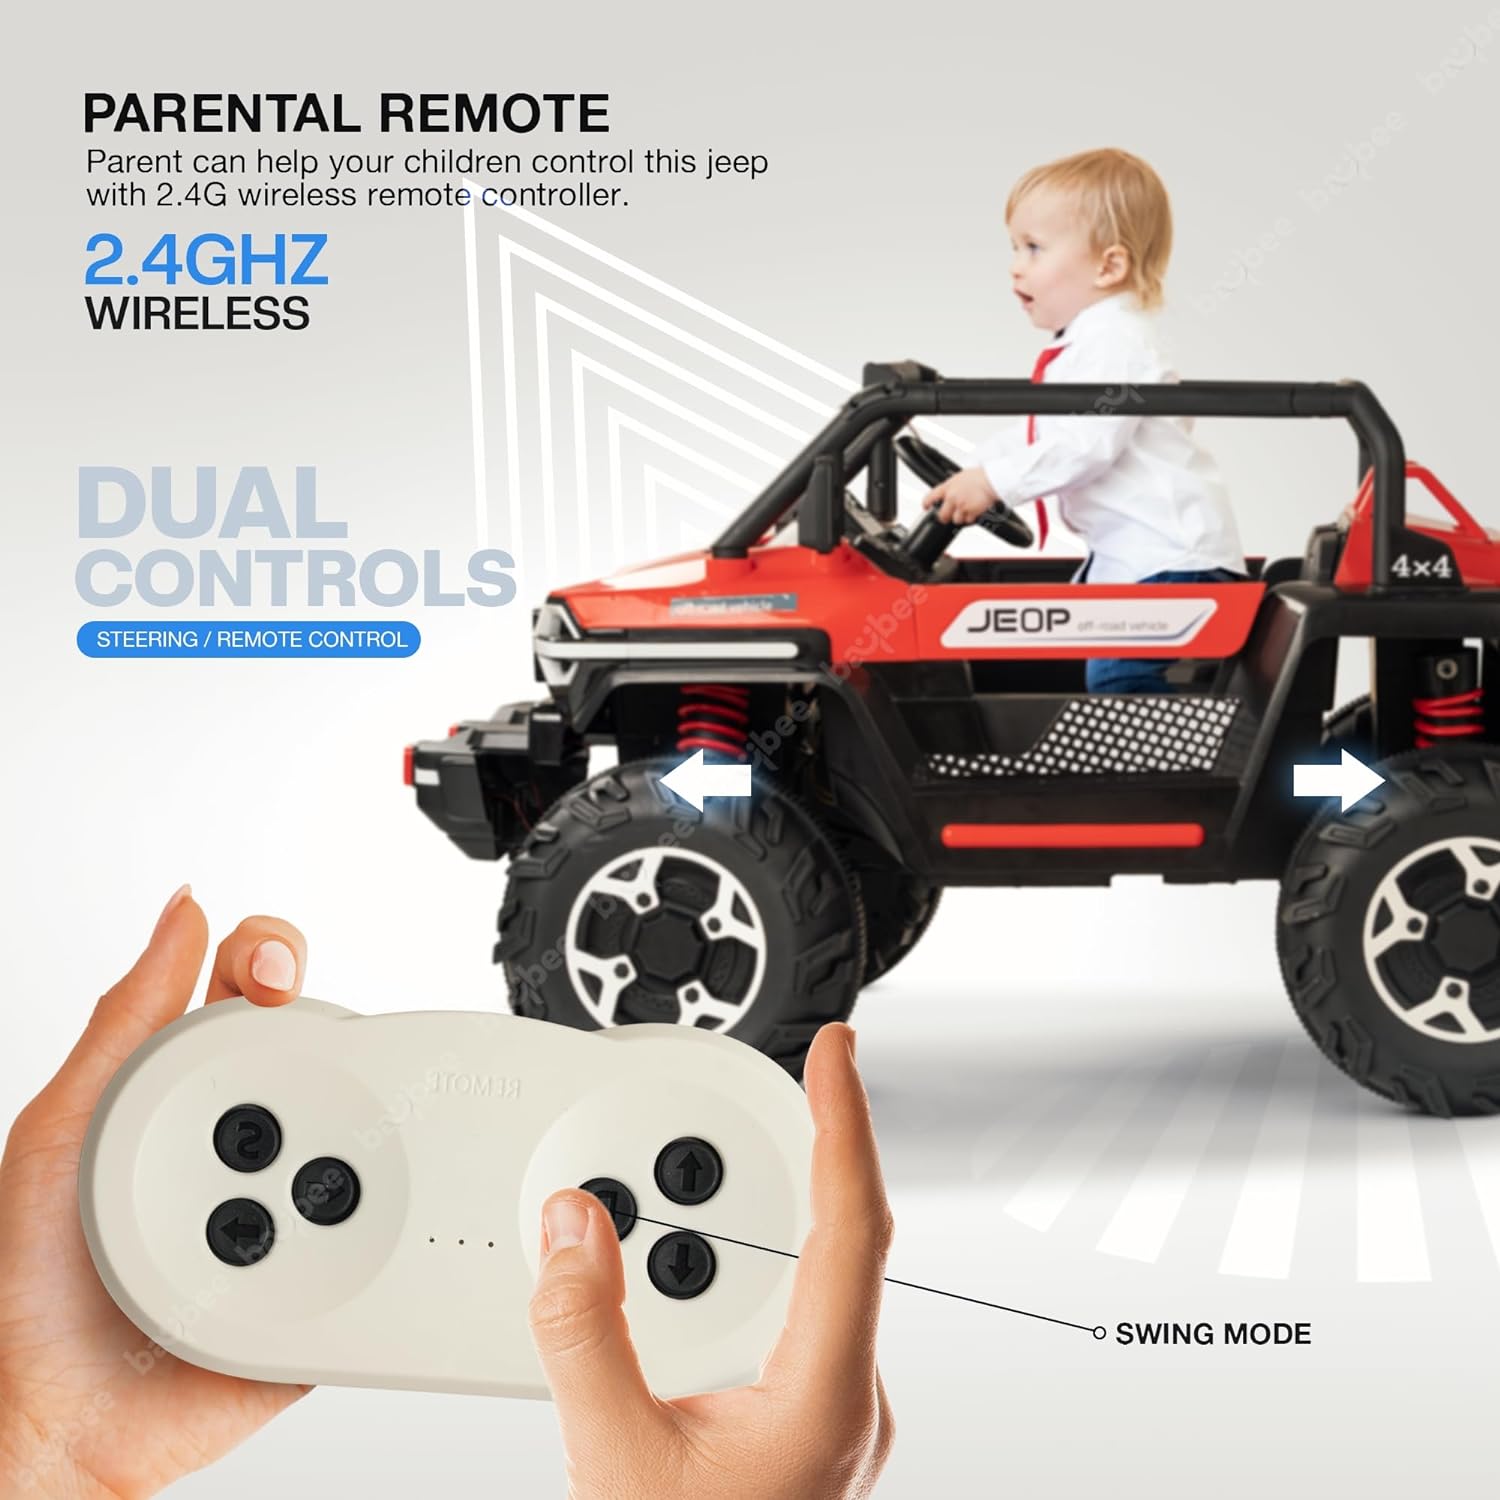 Minikin Fury 2x2 Rechargeable Jeep | Top End Configuration | Ages 1-8 Years